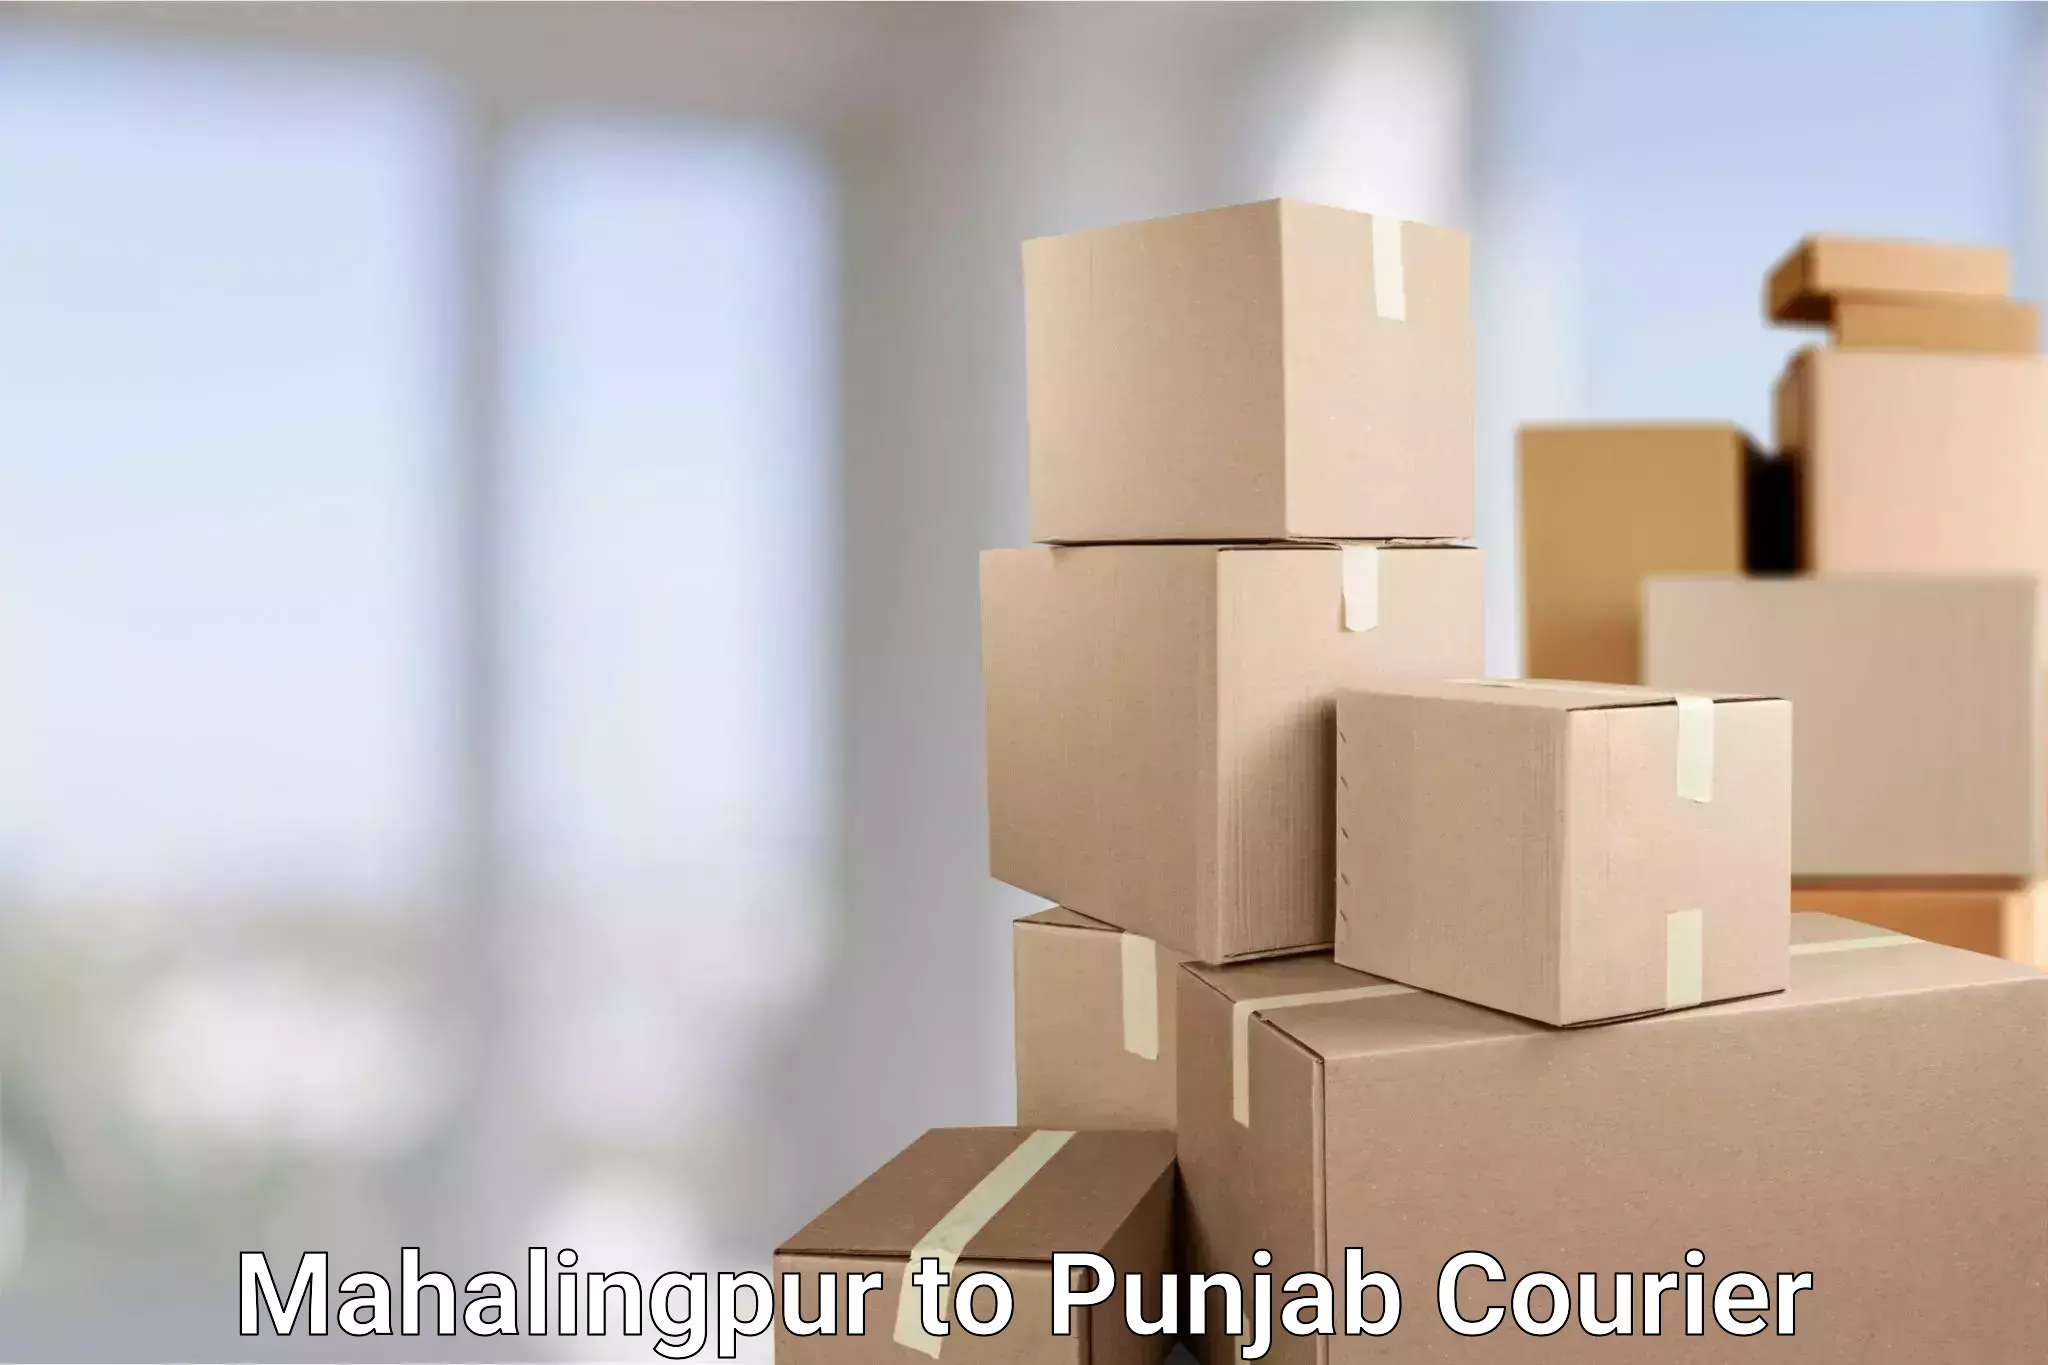 Same-day delivery solutions Mahalingpur to Ajnala